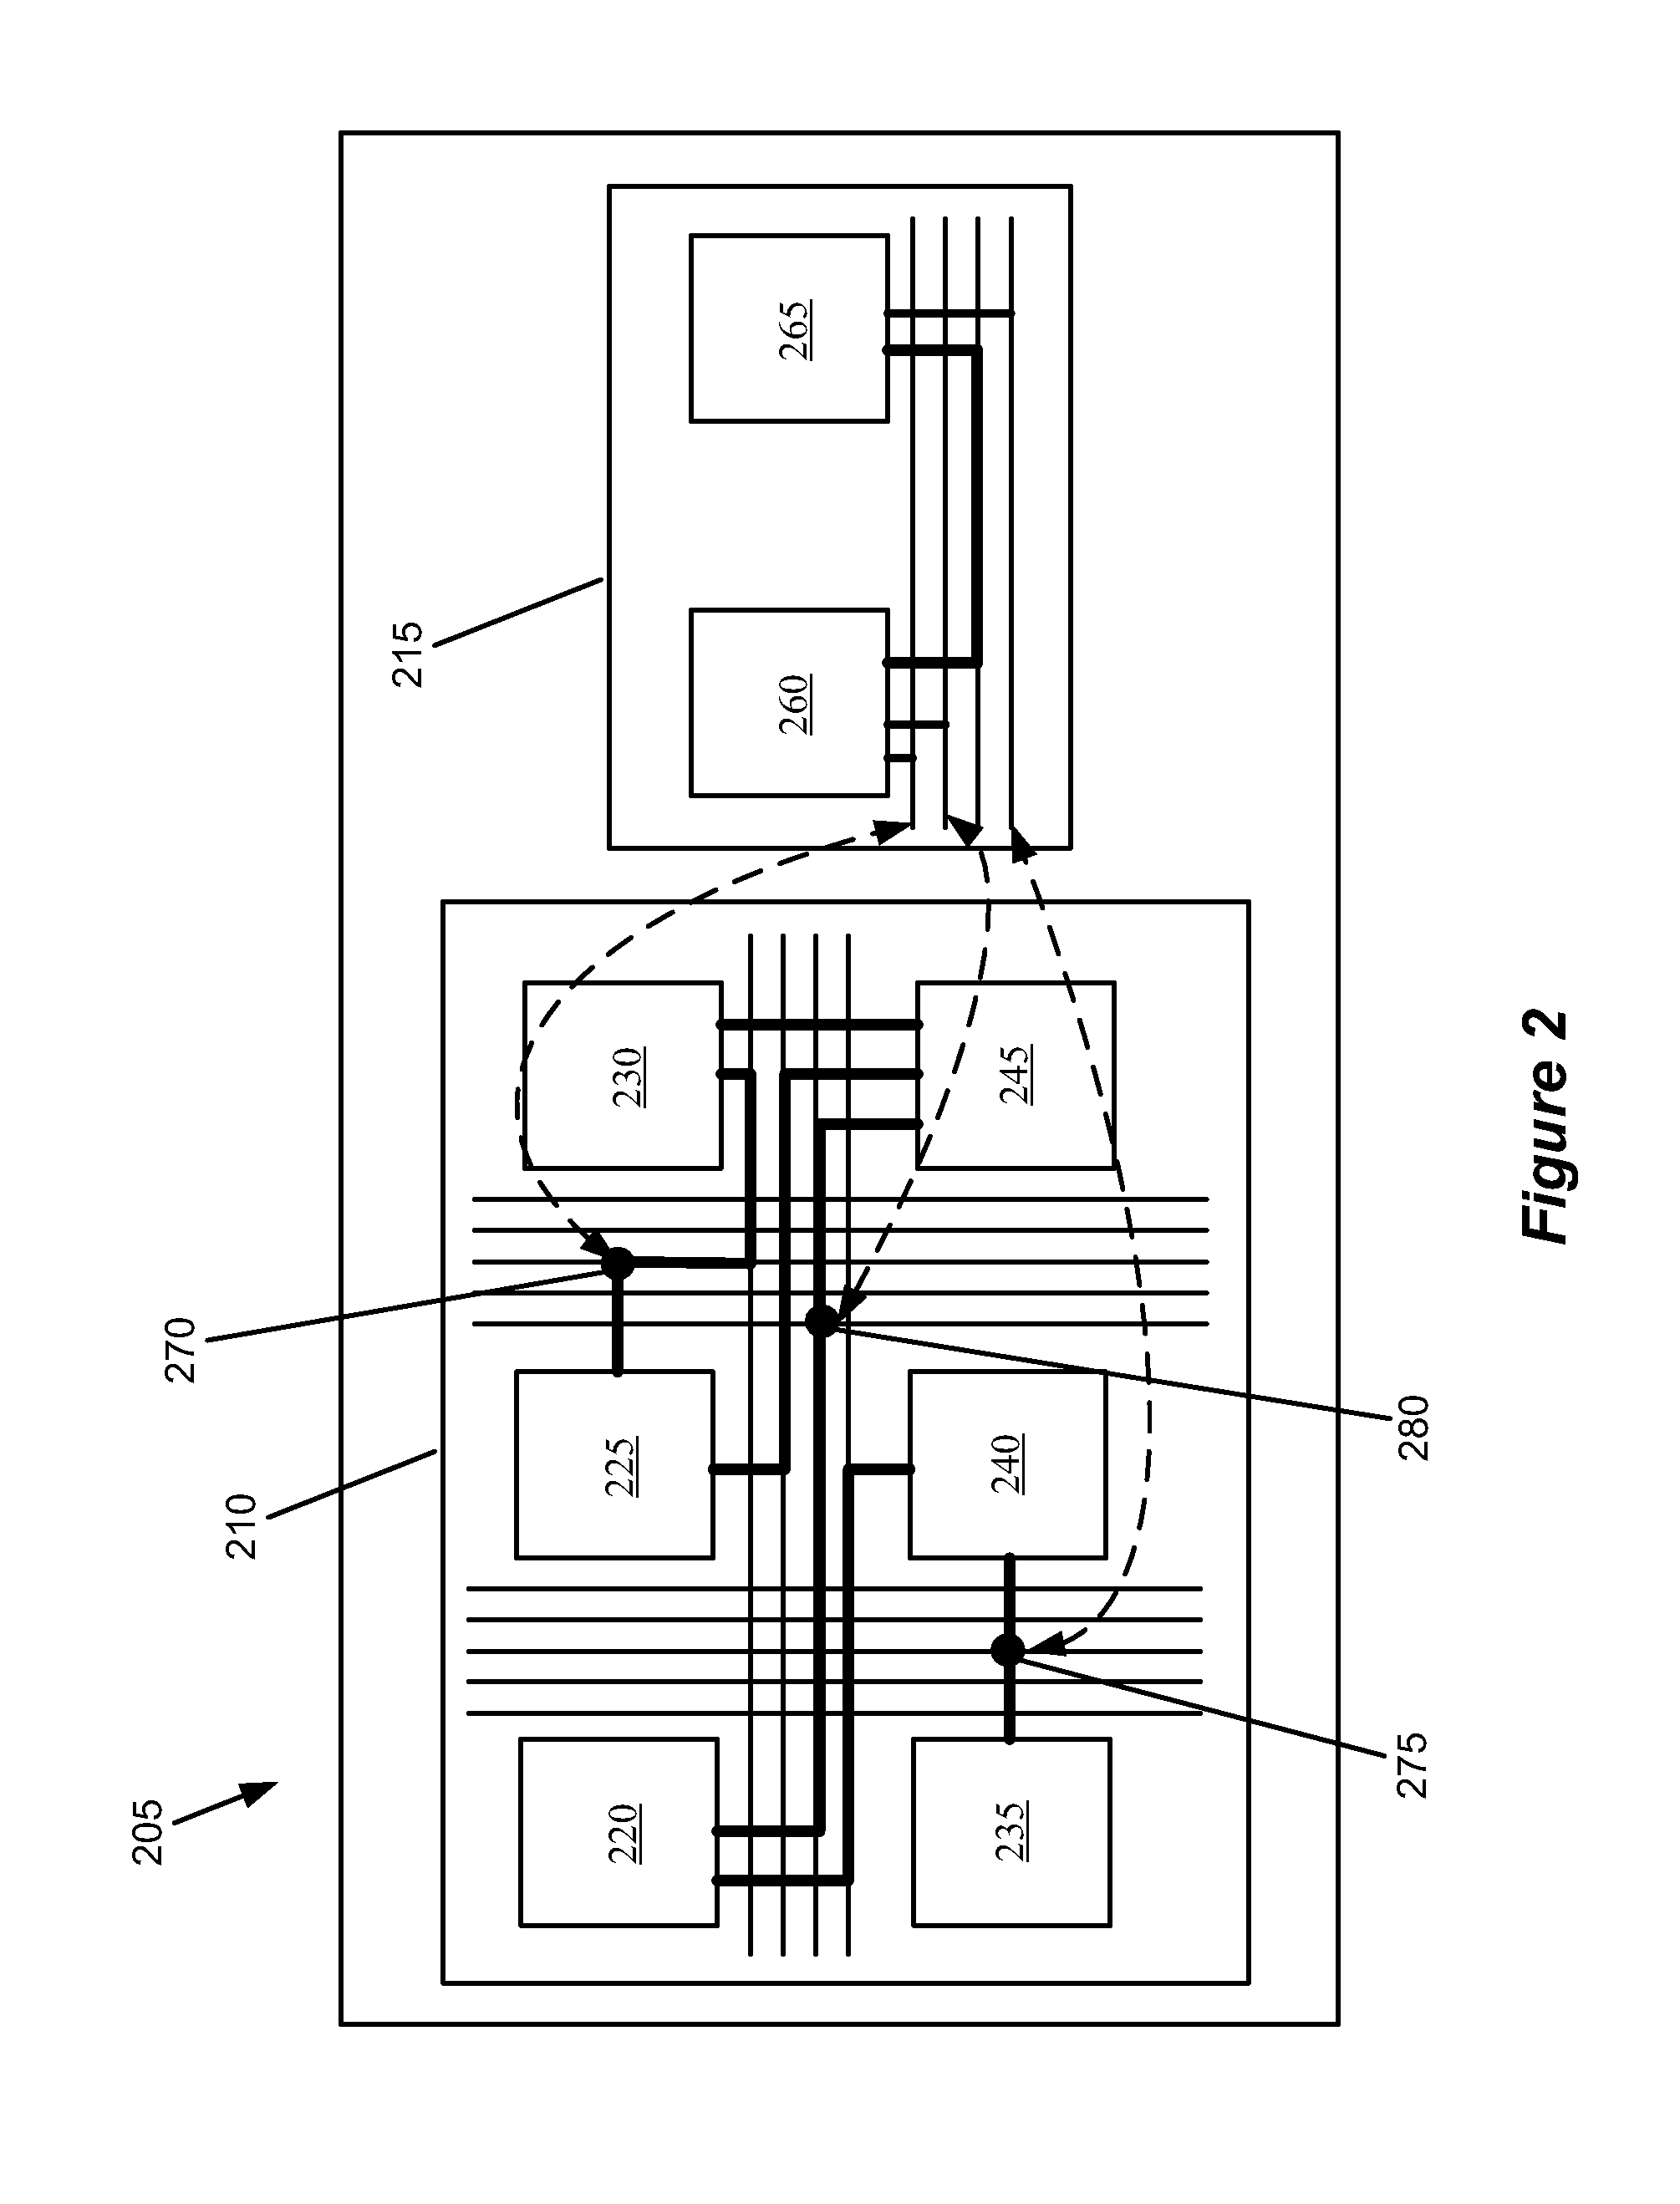 Integrated circuit (IC) with primary and secondary networks and device containing such an IC